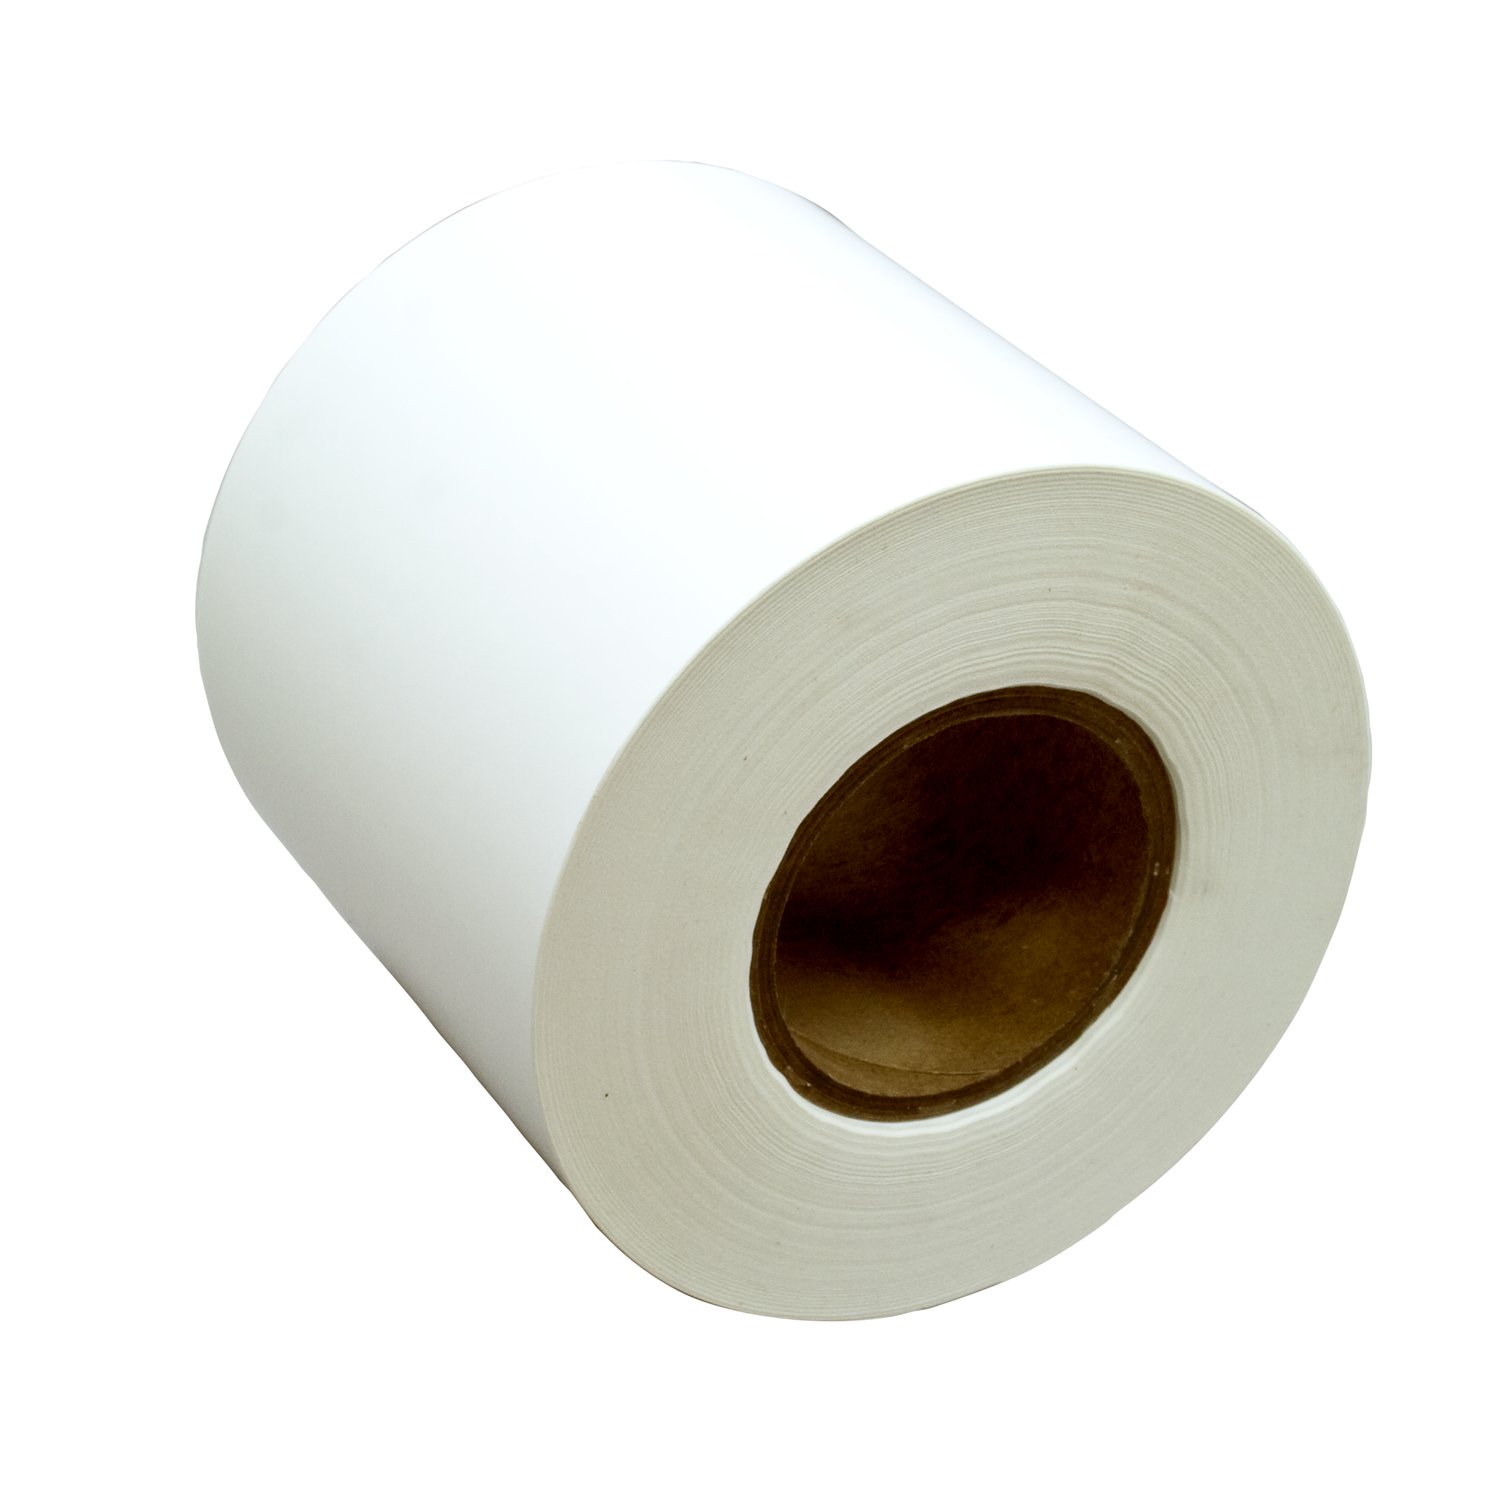 7100085483 - 3M Thermal Transfer Label Material 7246, Matte White Polyester, 4.5 in
x 1668 ft, 1 Roll/Case